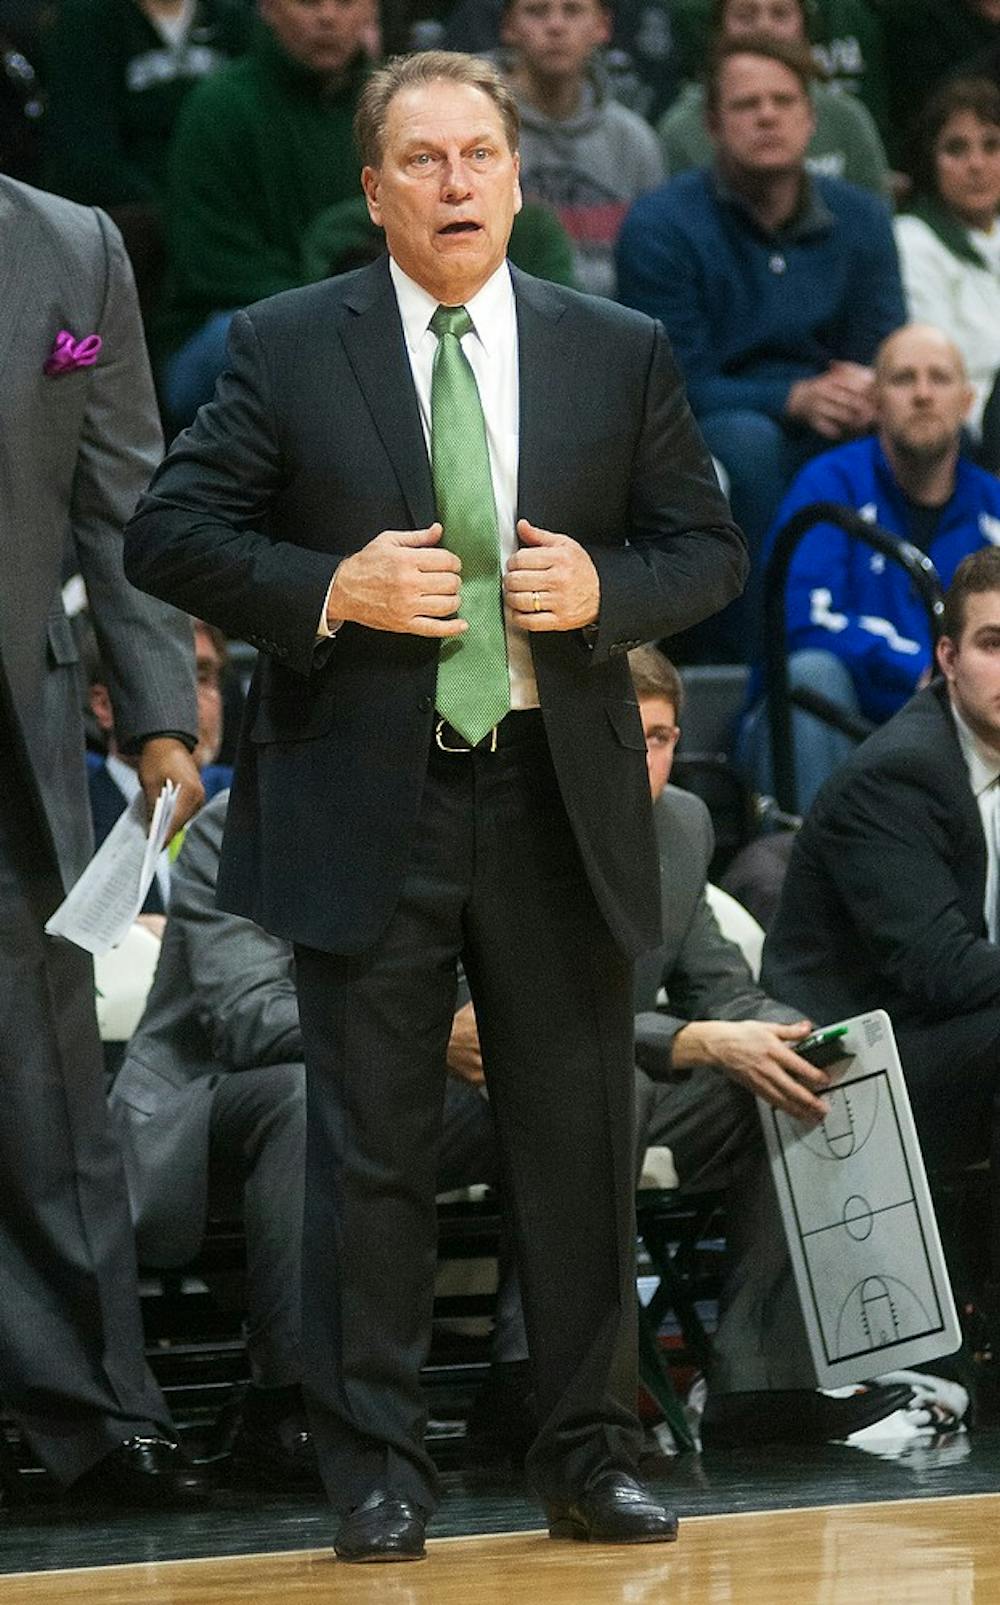 <p>Head coach Tom Izzo reacts to a foul by freshman guard Lourawls Nairn Jr. during the game against Maryland on Dec. 30, 2014, at Breslin Center. The Spartans were defeated by the Terrapins, 68-66 in double overtime. Danyelle Morrow/The State News</p>